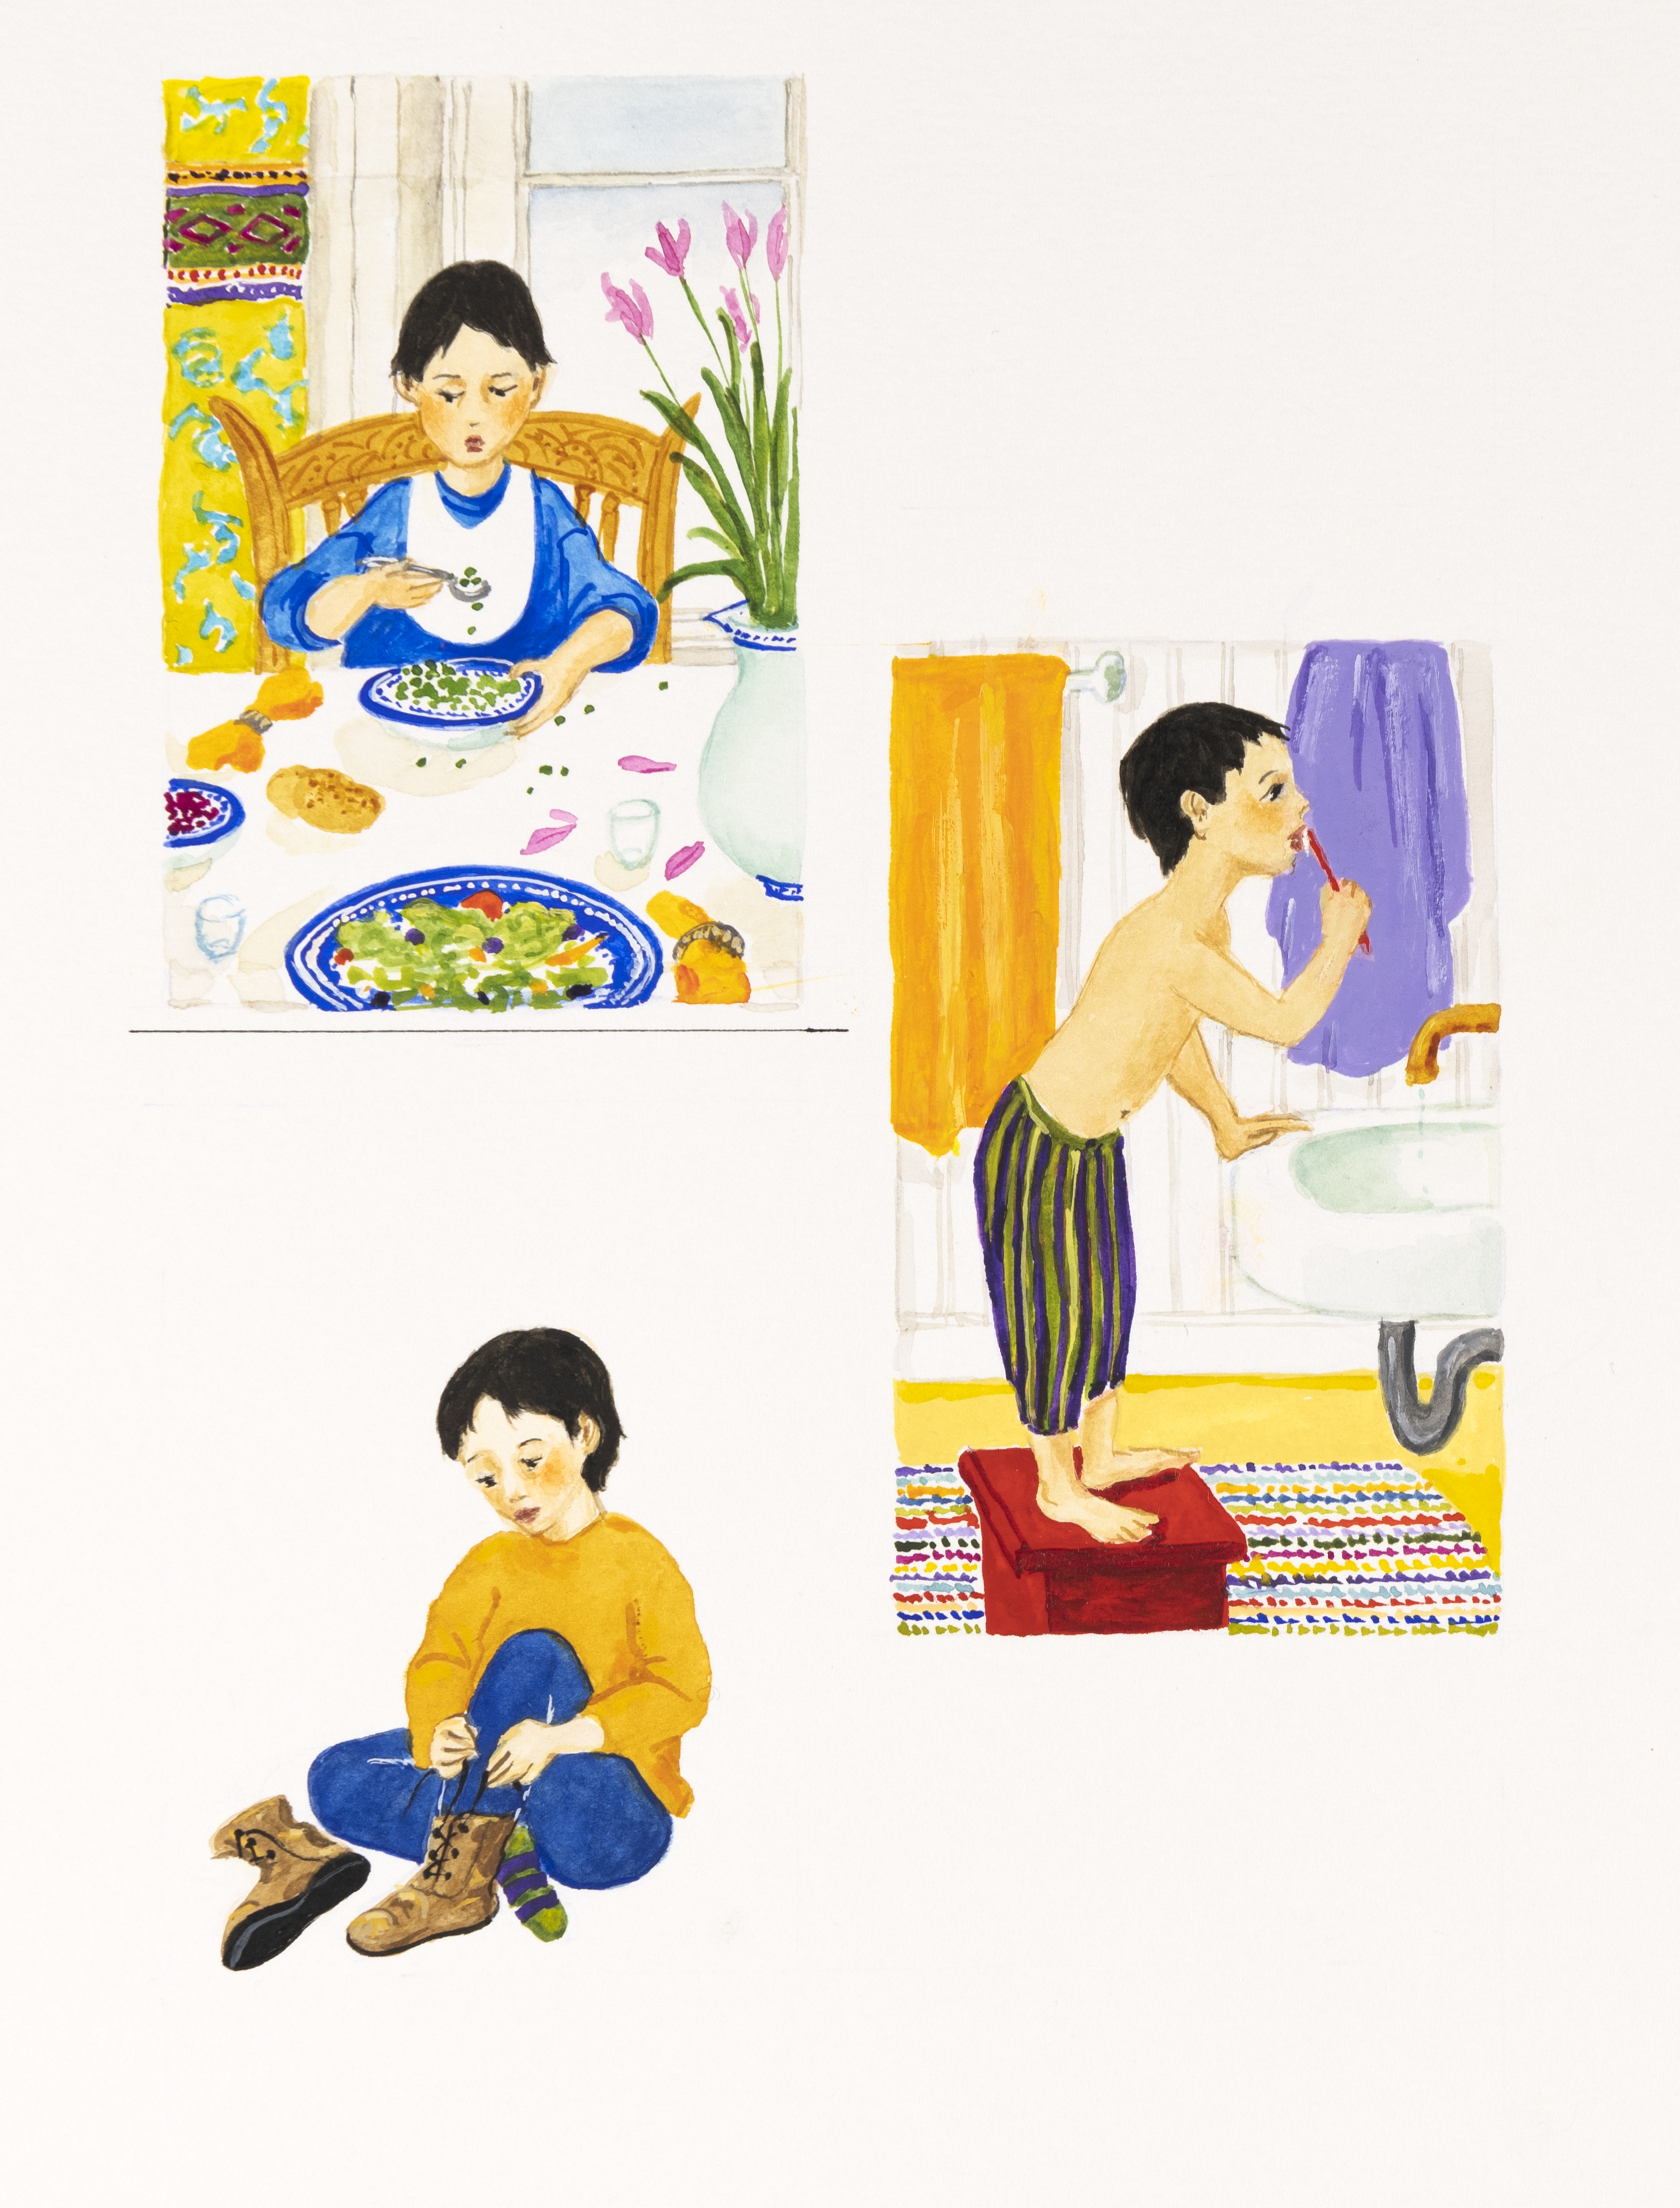 Illustration of child eating, brushing teeth, and putting on boots. 